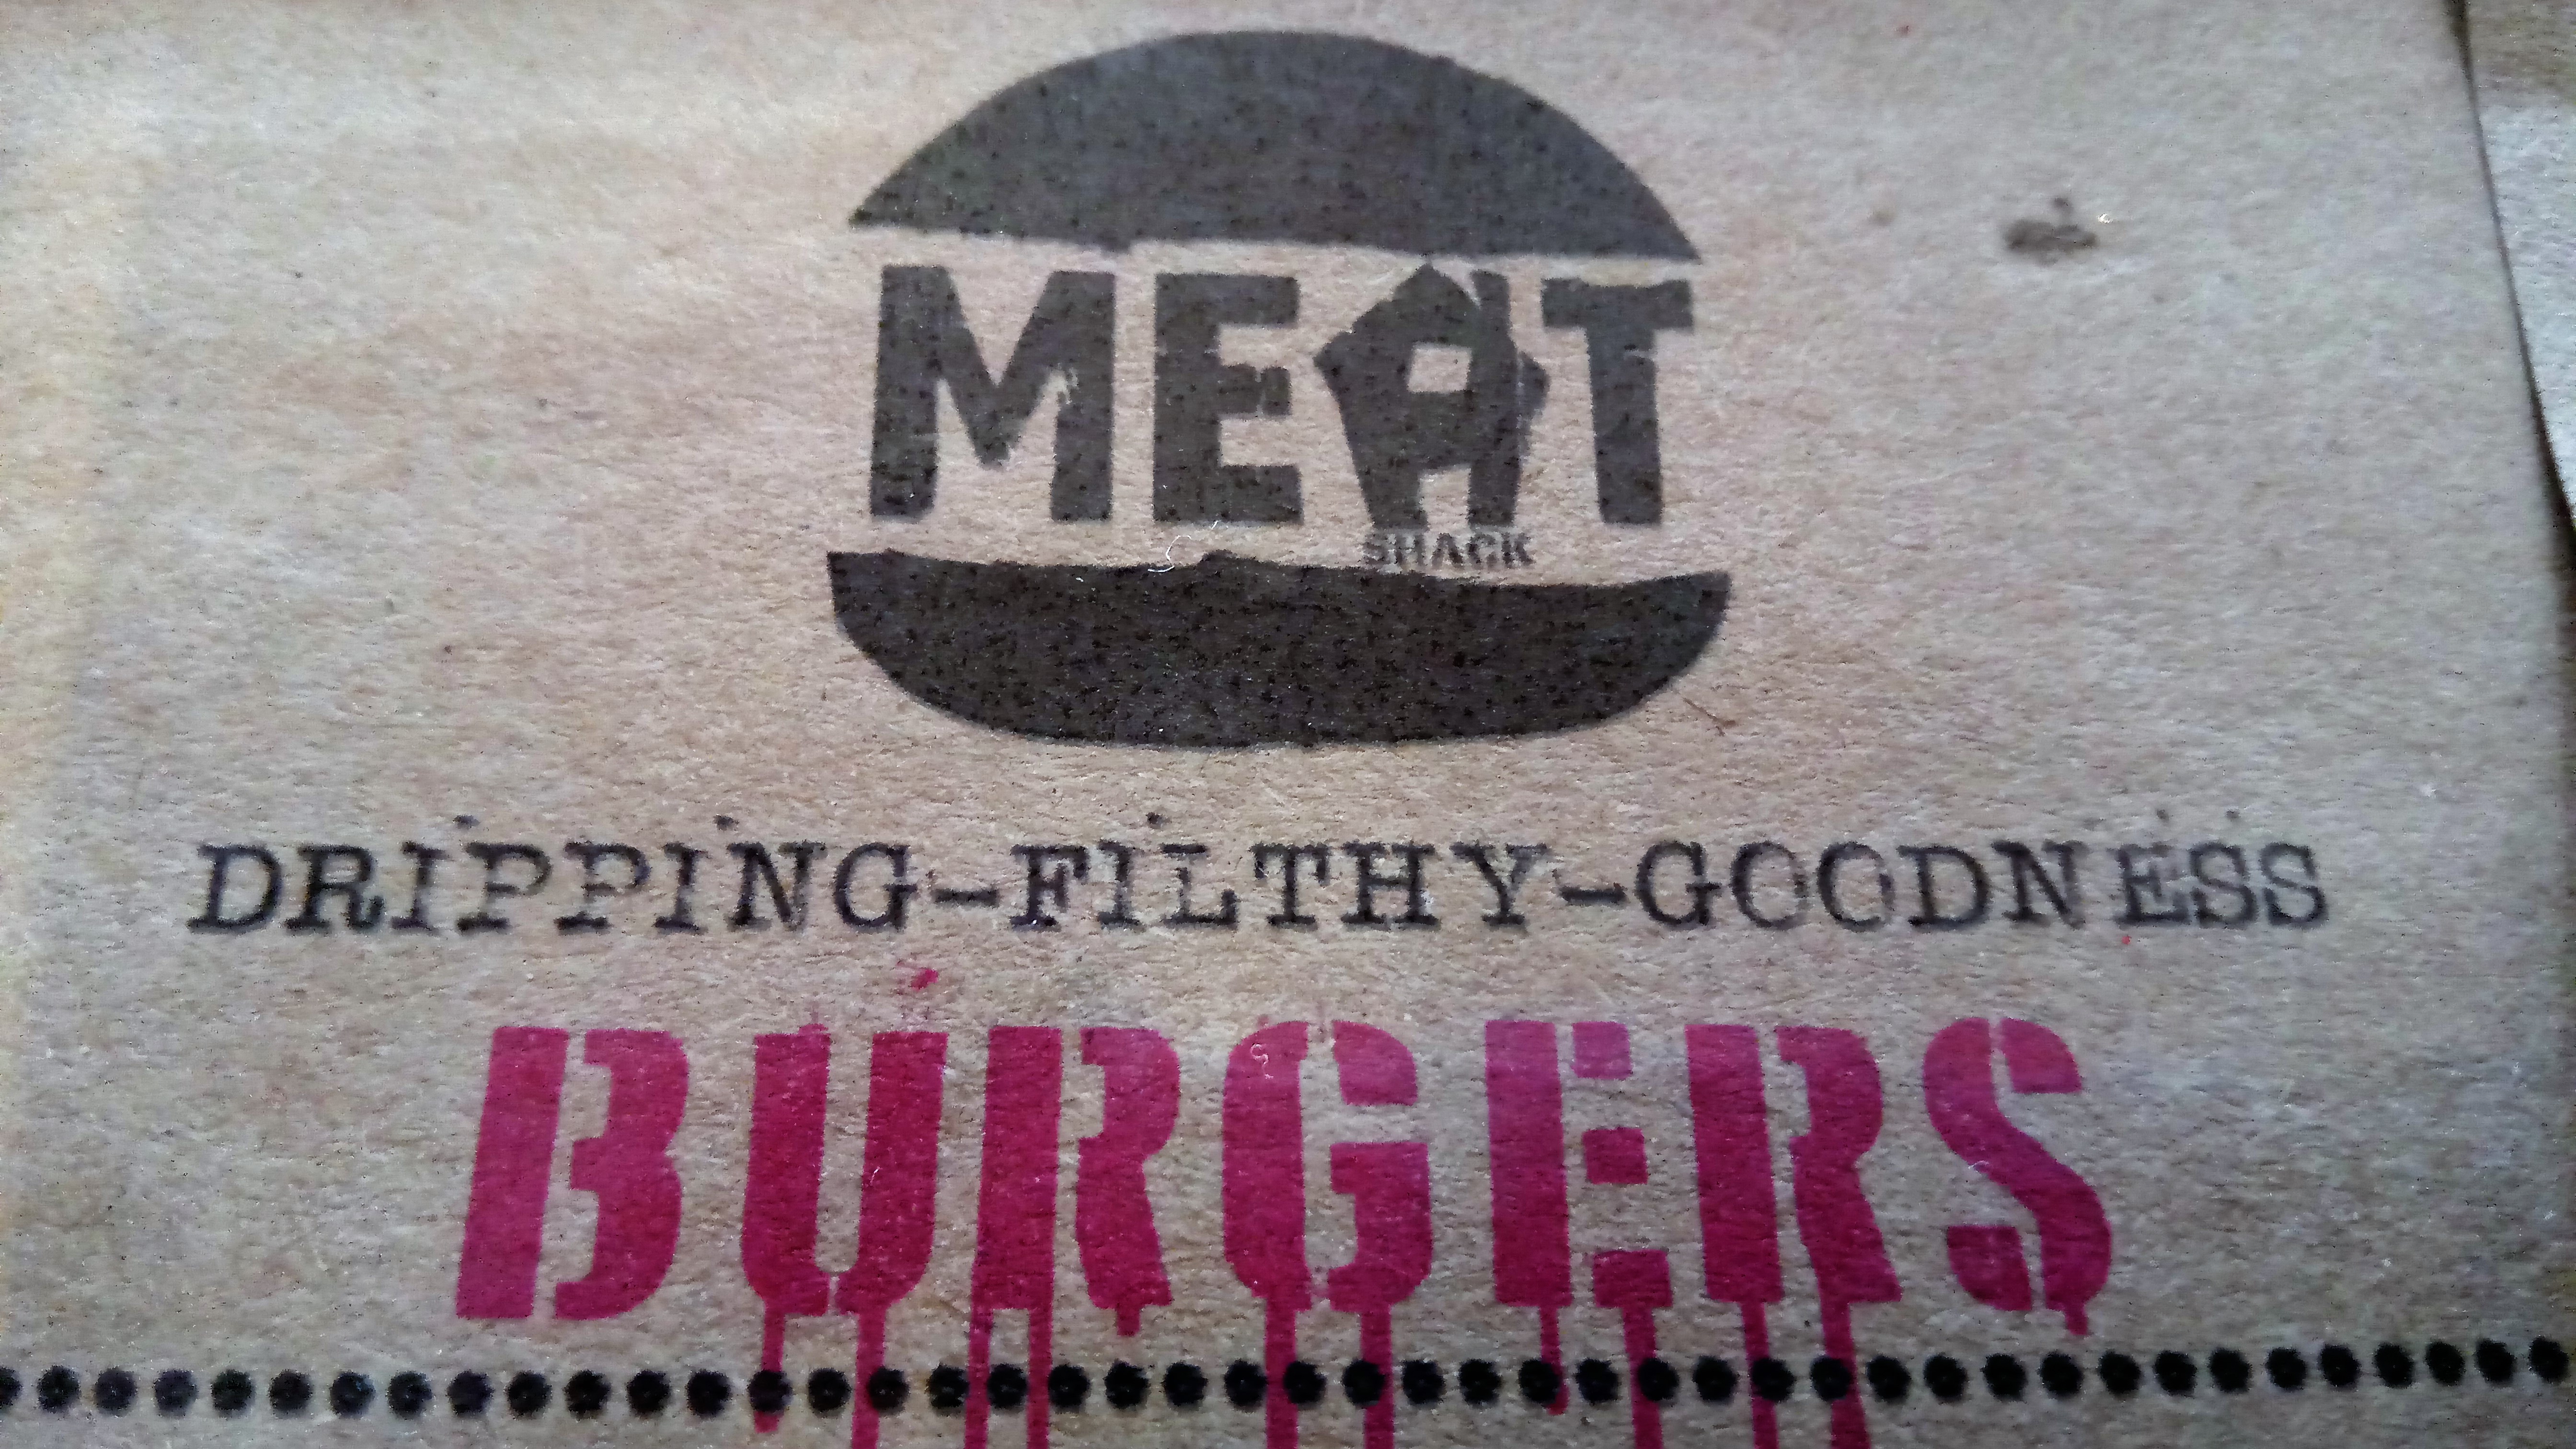 Review: Food Attack at The Meat Shack